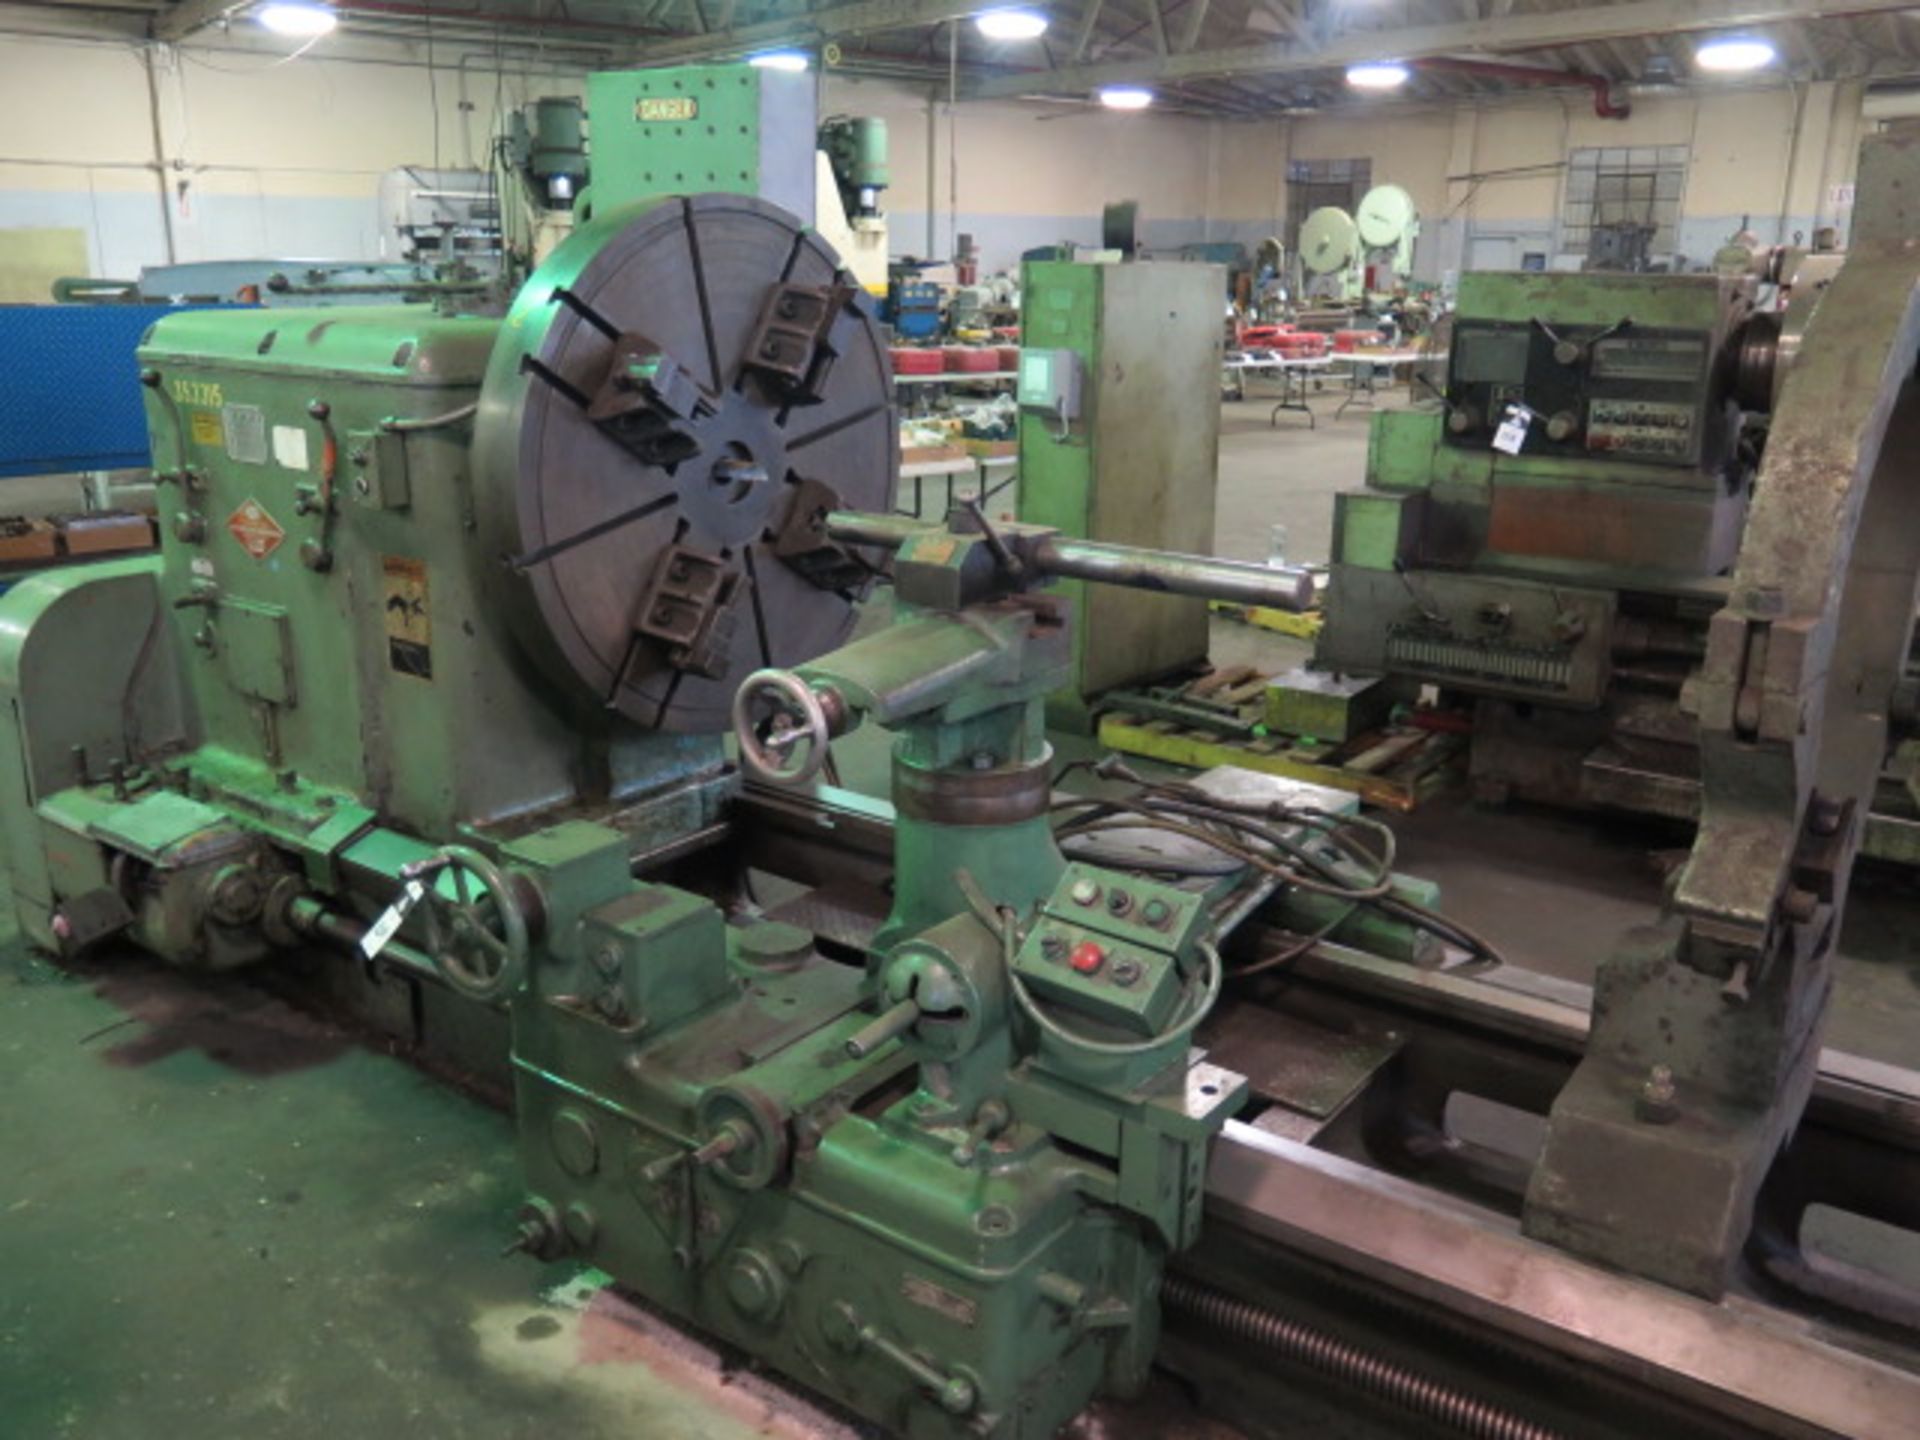 Niles A54P 62” x 140” Lathe s/n 23579 w/ 3.94-232 RPM, Inch Threading, Steady Rest, SOLD AS IS - Image 3 of 20